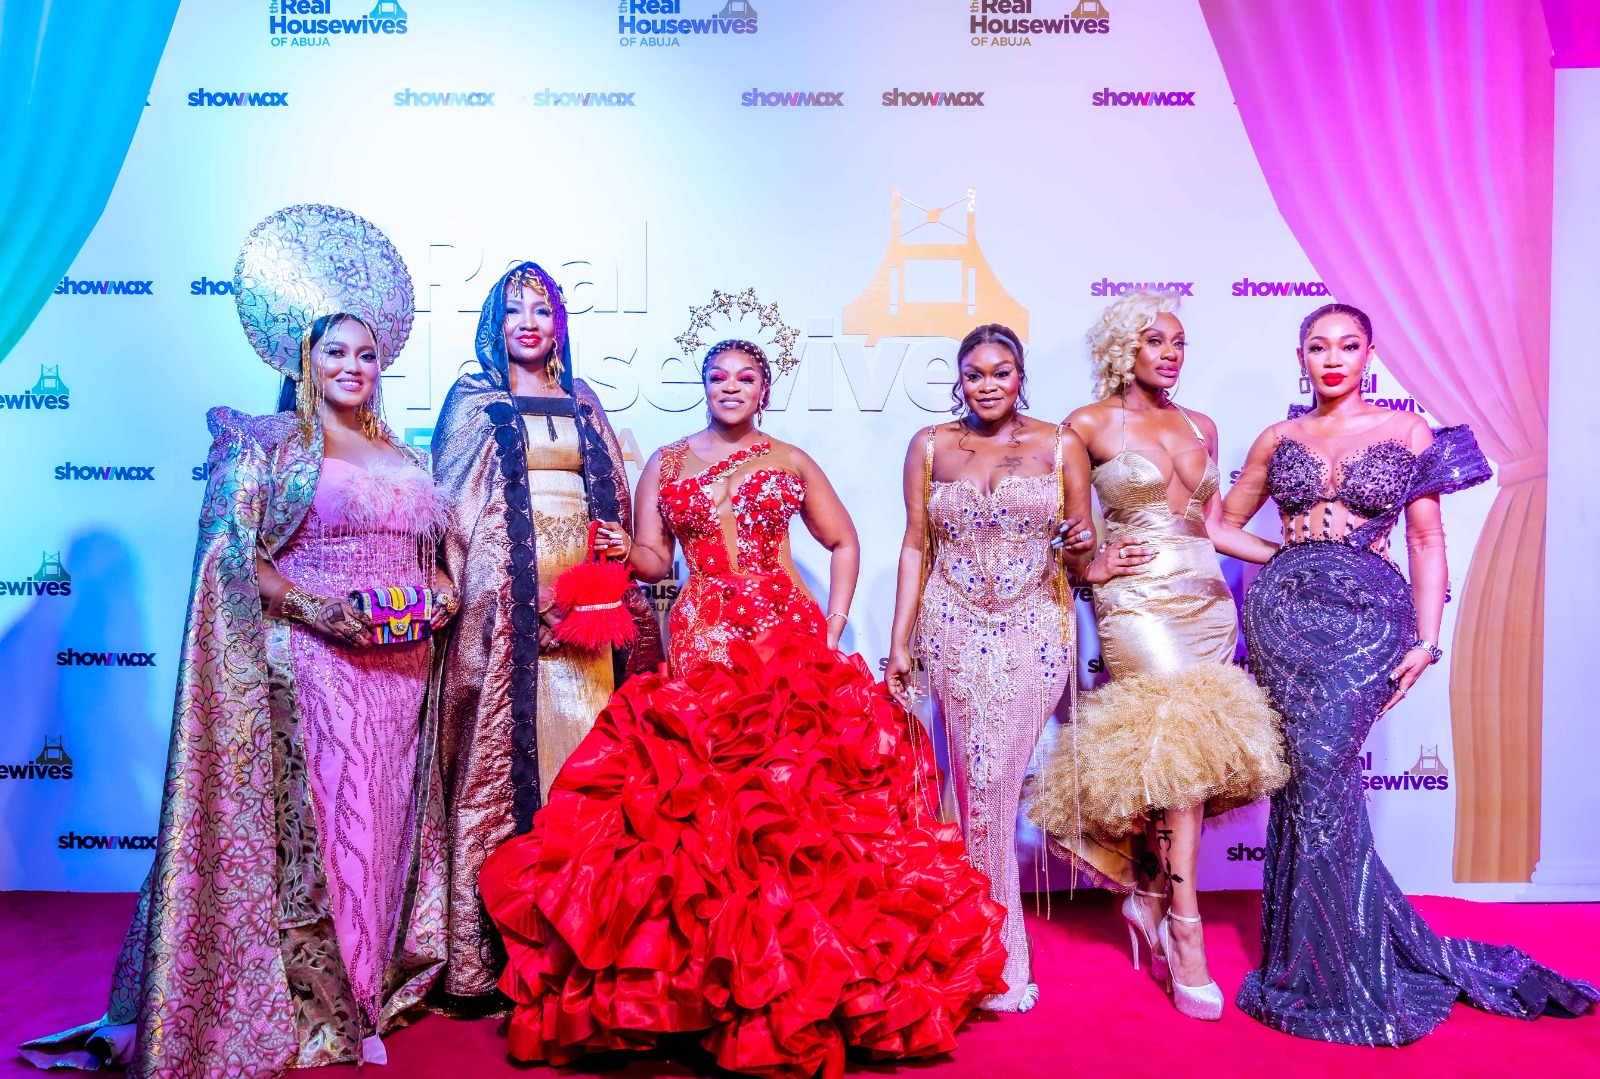  Five Things All The Real Housewives of Abuja Have in Common